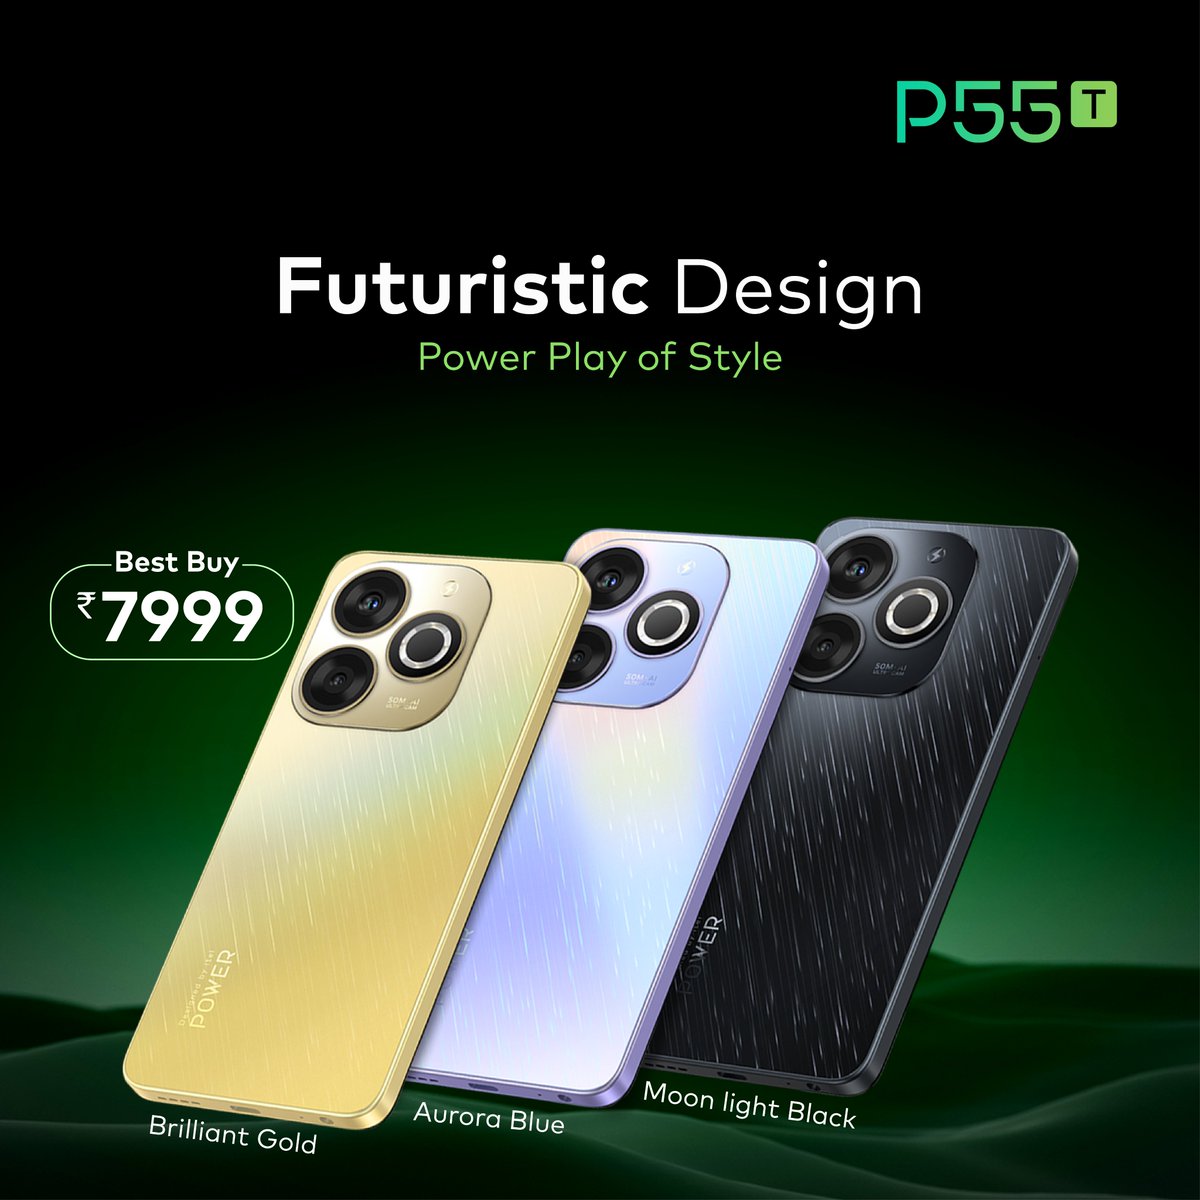 Choose the color that perfectly matches your style statement. The itel P55T comes in 3 stylish colors that make you stand out. Available at your nearest outlet for just Rs 7999. #enjoybetterlife #P55T #itelSmartphone